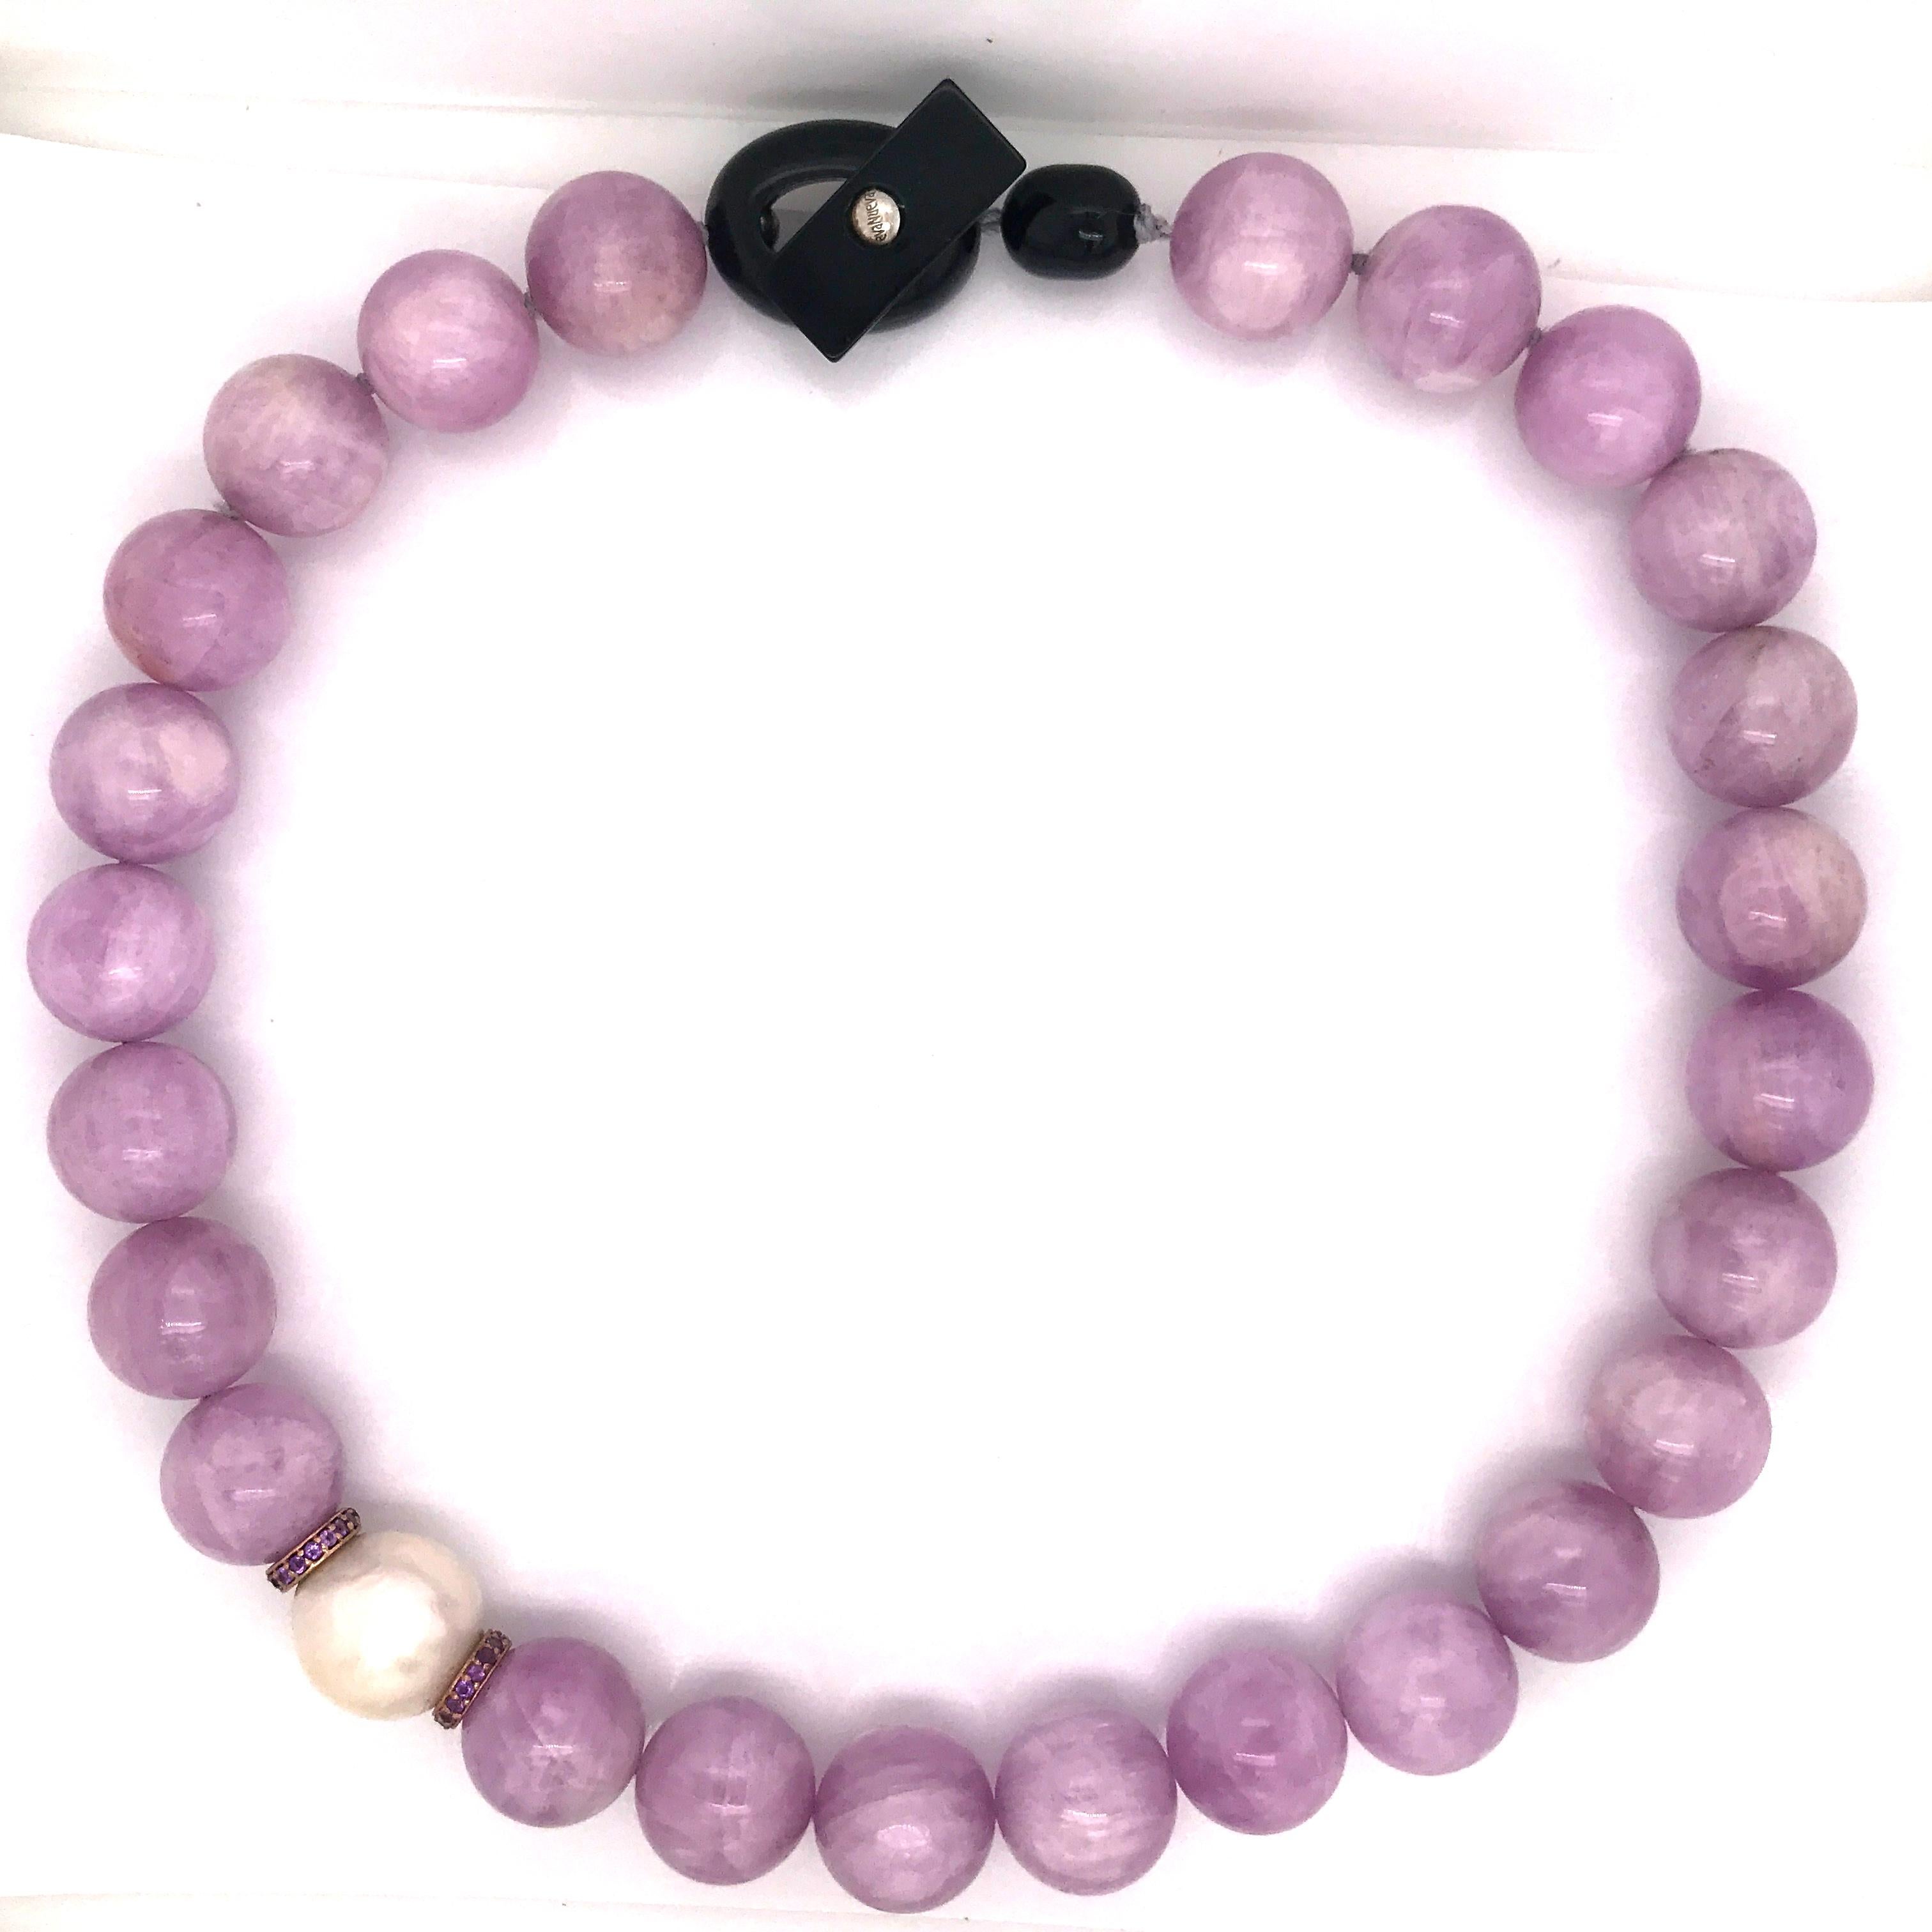 Discover this Kunzite Pearl, Amethyst and Freshwater Pearl, Rose Gold 18K Beaded Necklace.
Kunzite is a stone with pink highlights perfect expression of the feminine energy .
Freshwater Pearl
Amethyst
Bakelite Clasp
Rose Gold 18 Carat 2 gr